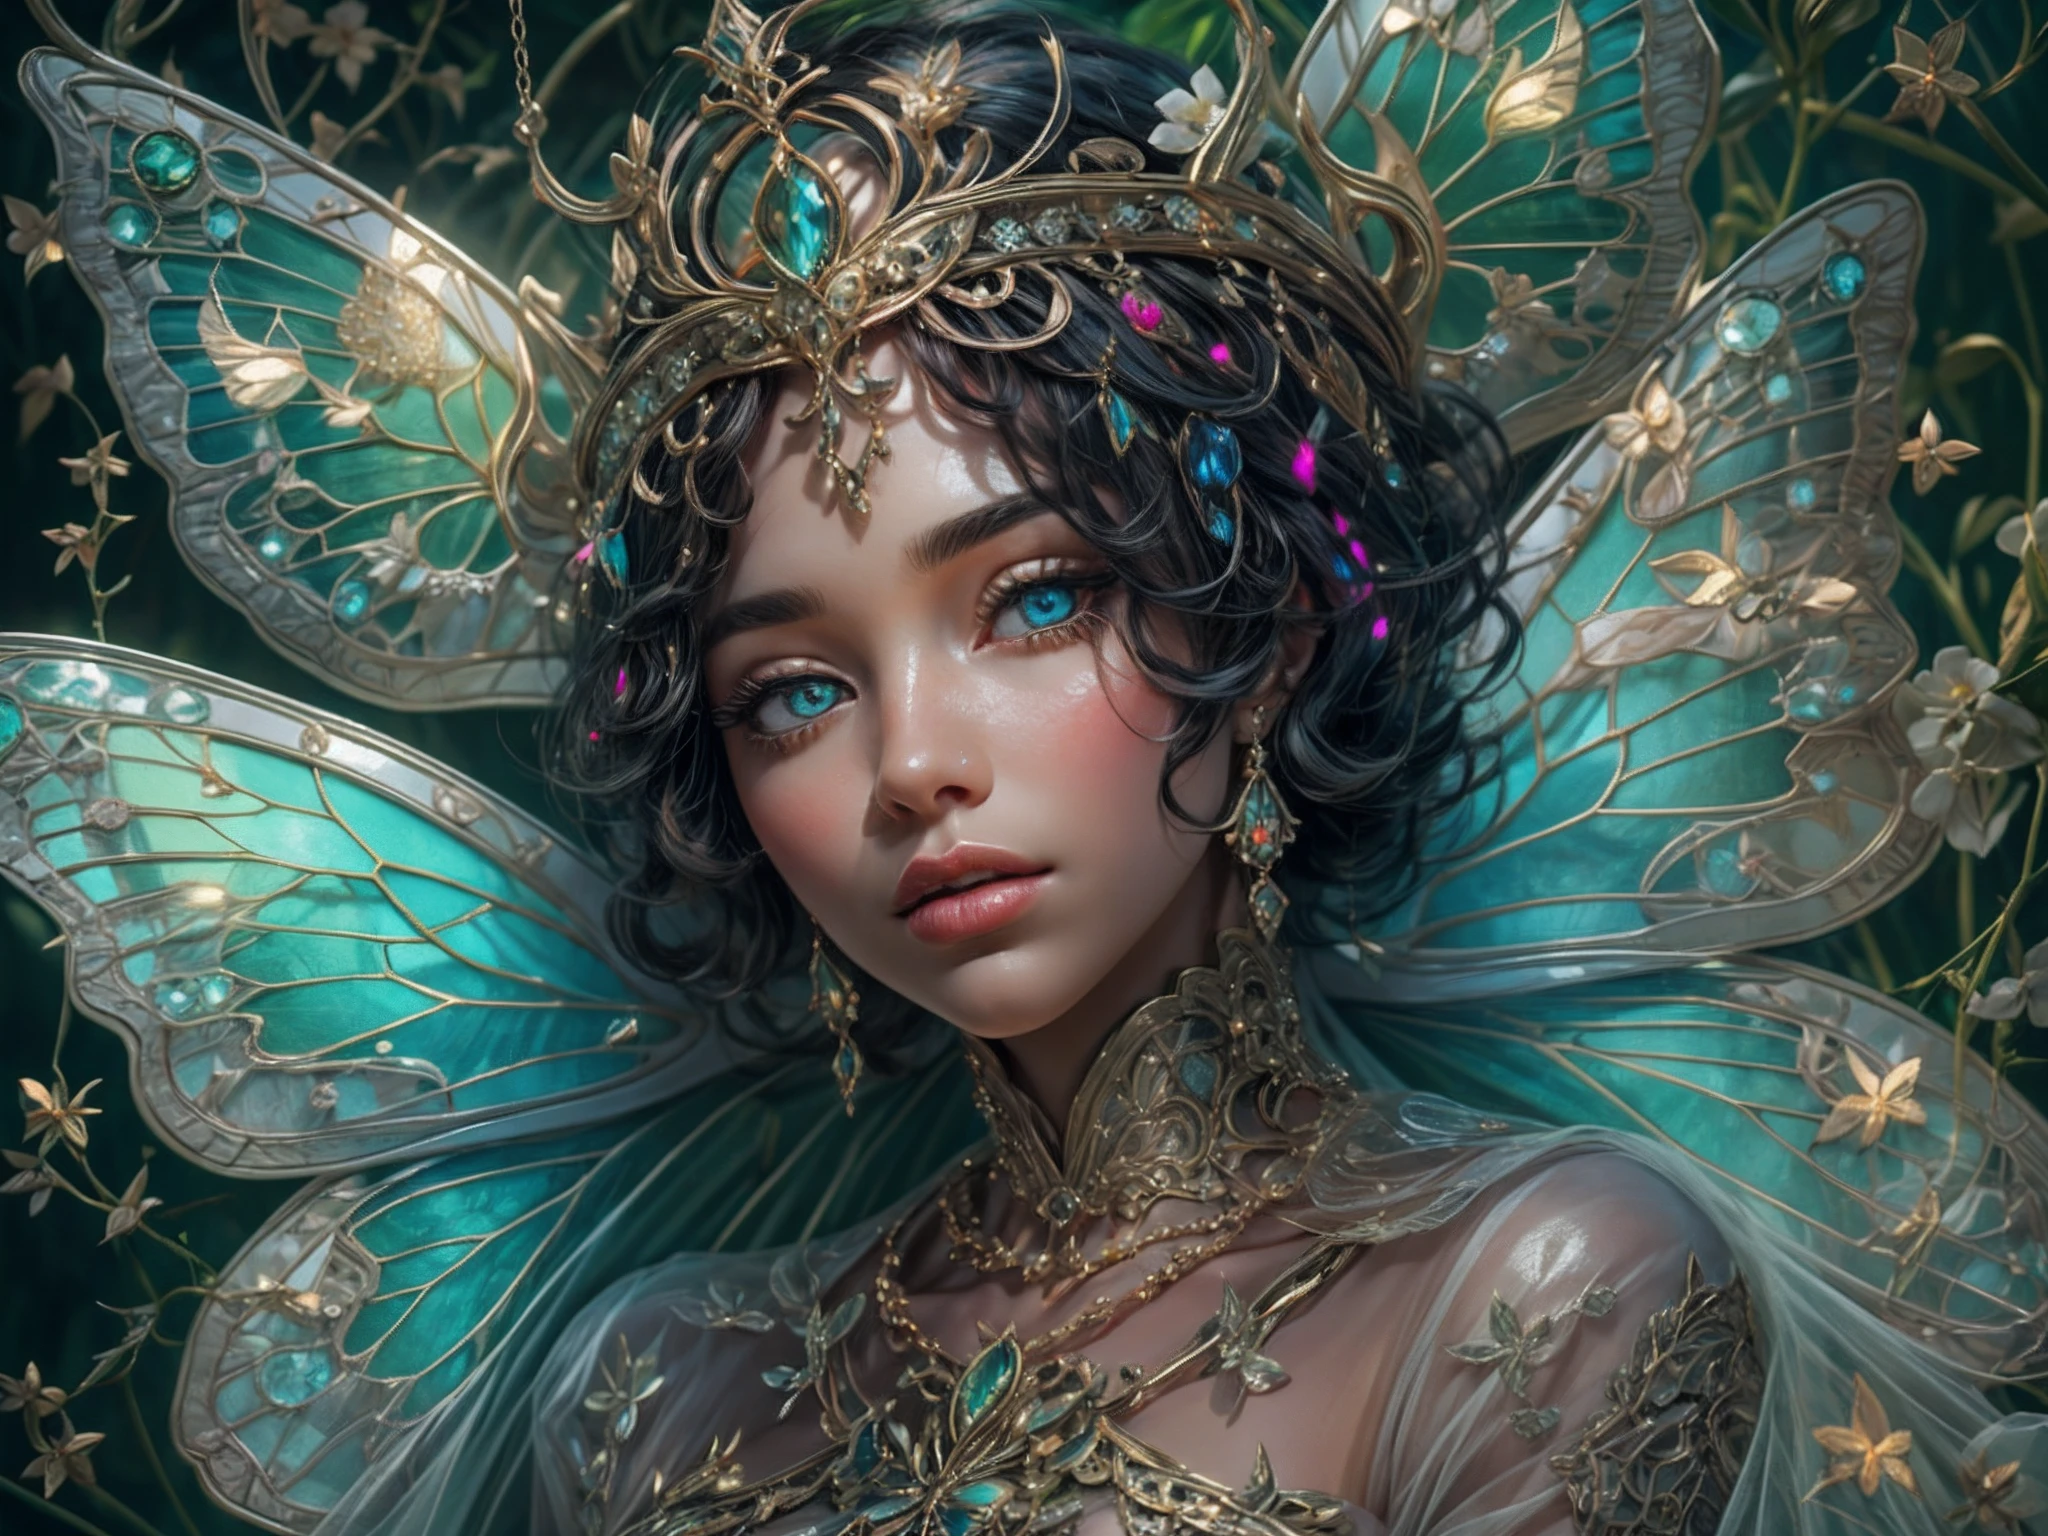 This is a realistic fantasy masterpiece with lots of shimmer, glitter, and intricate ornate detail. Generate one  woman with a beautiful and delicate crown sitting on a garden swing at night. She is a beautiful and seductive butterfly queen with stunning curly black hair, (((incredibly realistic and detailed dynamic eyes in bright colors with realistic shading))).  Her skin is translucent white, her eyes sparkle, and her dress is elegant. Her dress is spun of the finest gossamer silk with delicate, intricate, and subtle floral detailing and gold silk butterfly sleeves. Her face is lovely and . Include glow-in-the-dark flowers, lots of particles, highly realistic fantasy butteflies with translucent jewel-toned wings and fine detailing, and glow. The artwork is done in the style of Guviz and brings to mind masters in the genre such as trending fantasy works on Artstation and Midjourney. Camera: Utilize dynamic composition techniques to emphasize etherealness and delicate detail.